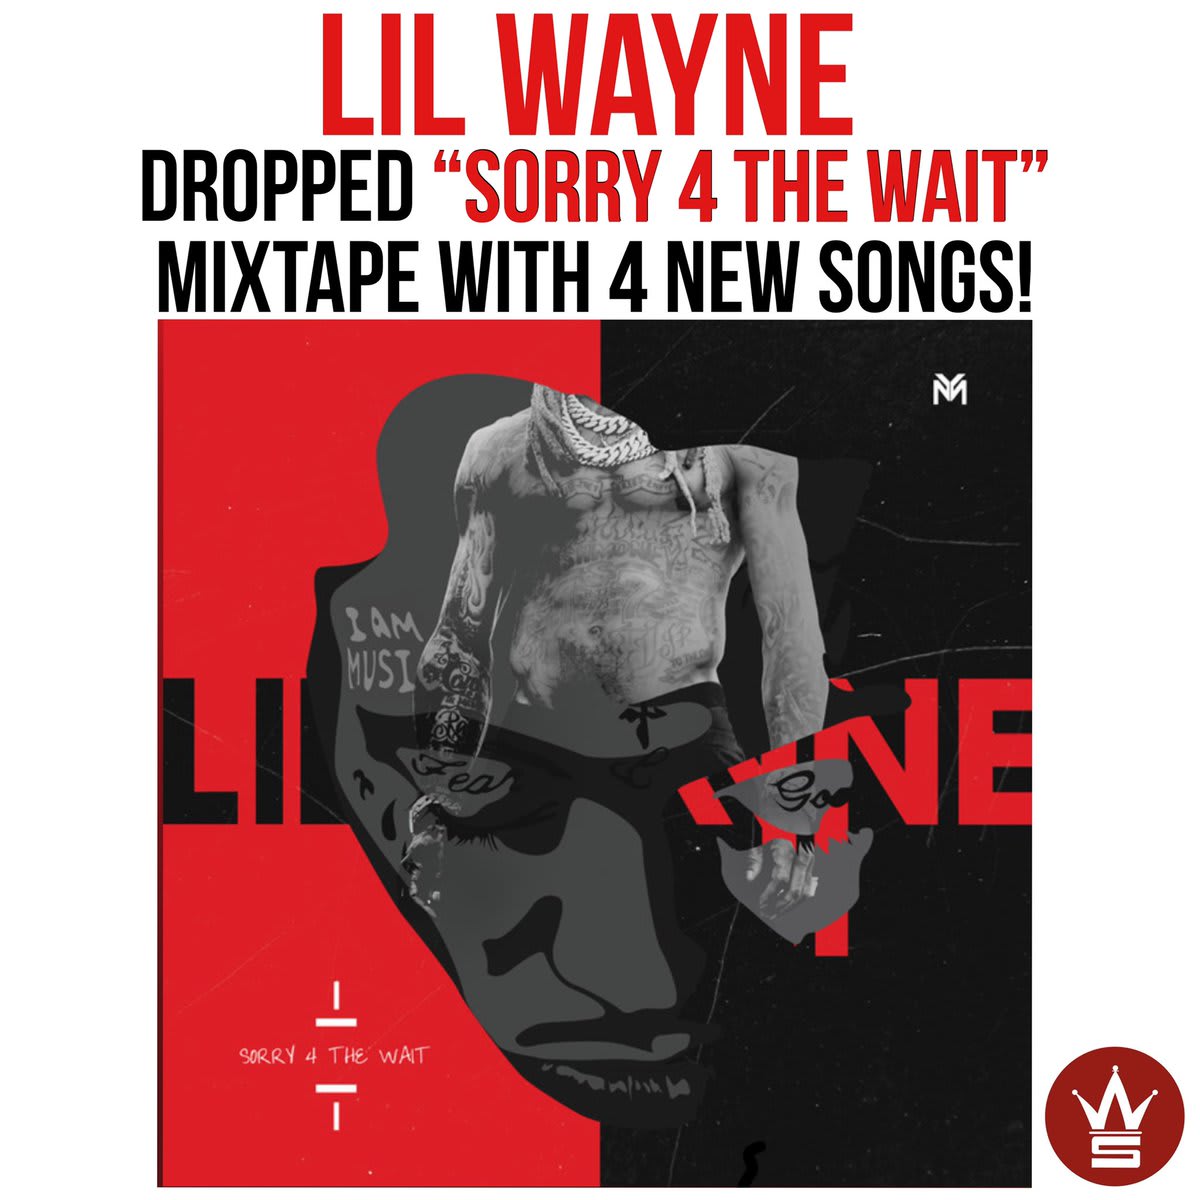 LilWayne dropped “Sorry 4 The Wait” mixtape earlier today. How’s it sounding so far?